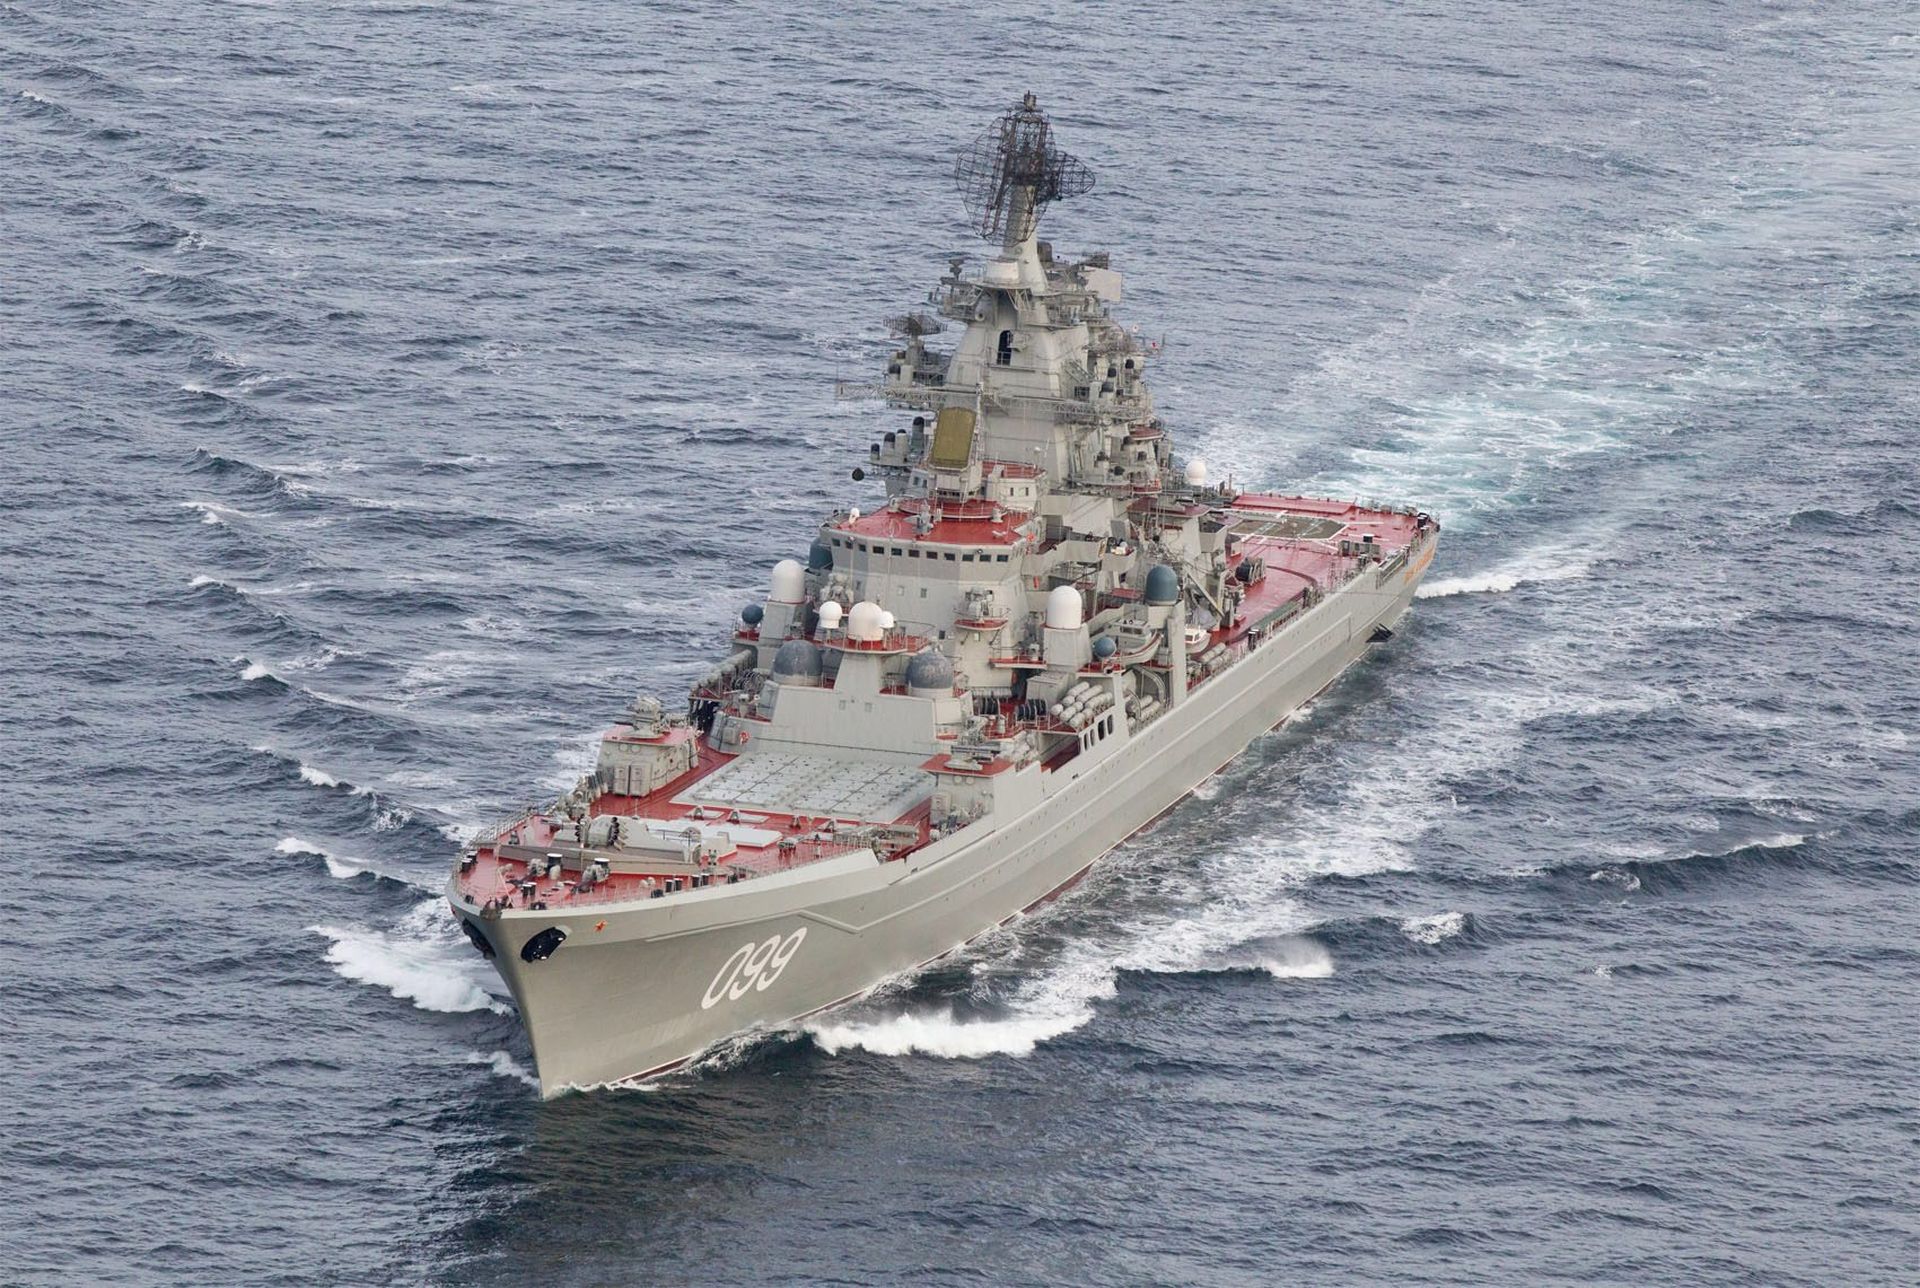 epa05591261 A handout photograph made available on 18 October 2016 by 333 Squadron, Norwegian Royal Airforce showing an aerial view taken from a Norwegian surveillance aircraft of the Russian Kirov-class cruiser Peter the Great in international waters off the coast of Northern Norway, 17 October, 2016.  EPA/333 Squadron, Norwegian Royal Airforce / HANDOUT NORWAY OUT HANDOUT EDITORIAL USE ONLY/NO SALES